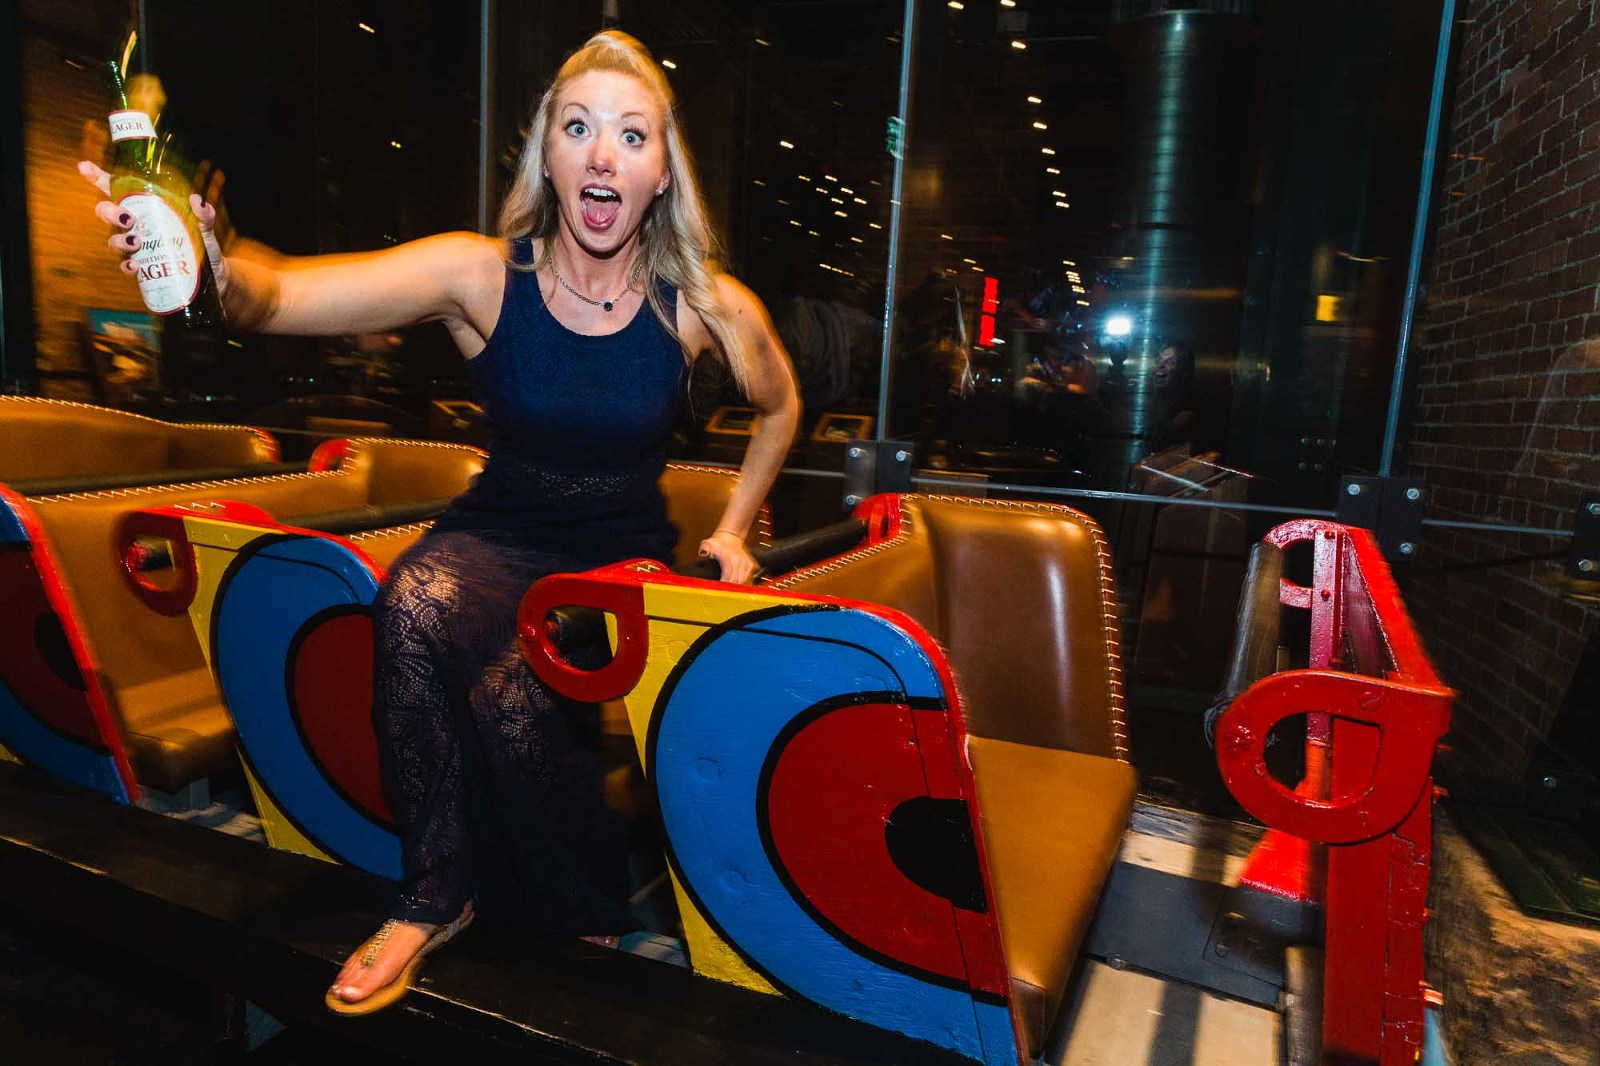 bridesmaid having fun at heinz history center wedding reception, laughing and goofing off in the kennywood racer car for a photograph